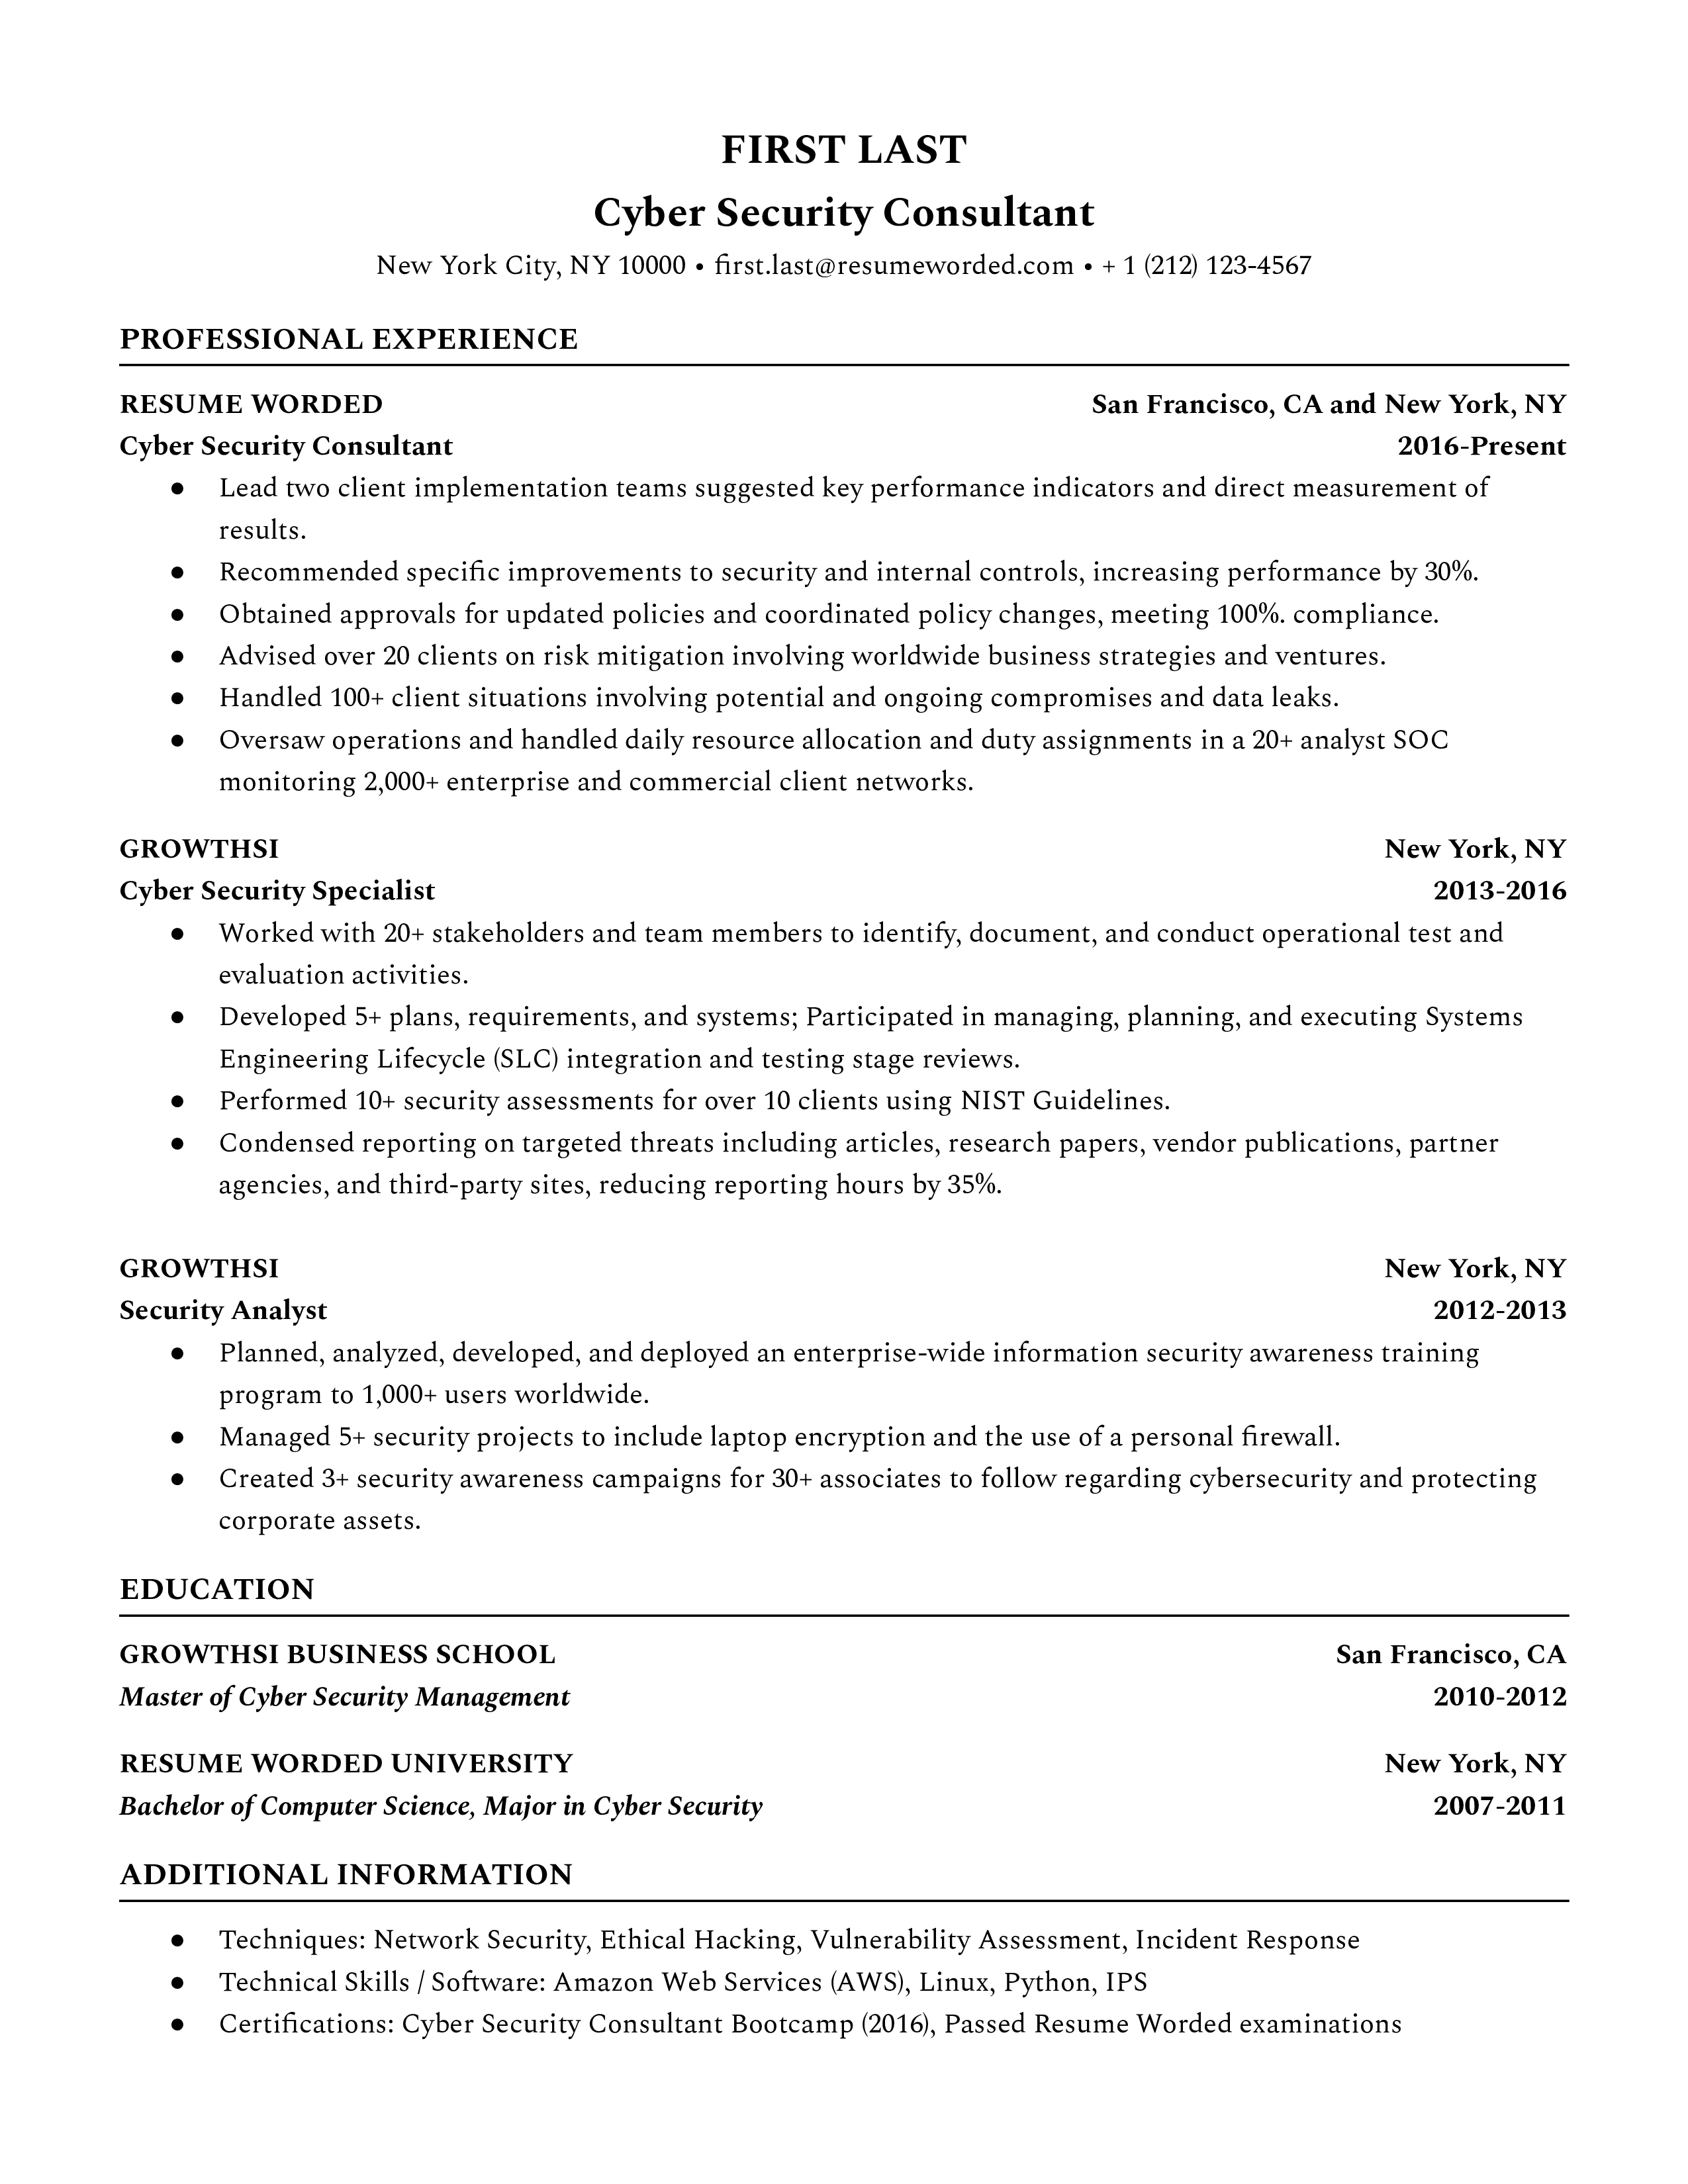 Picture of a CV for a Cyber Security Consultant role.